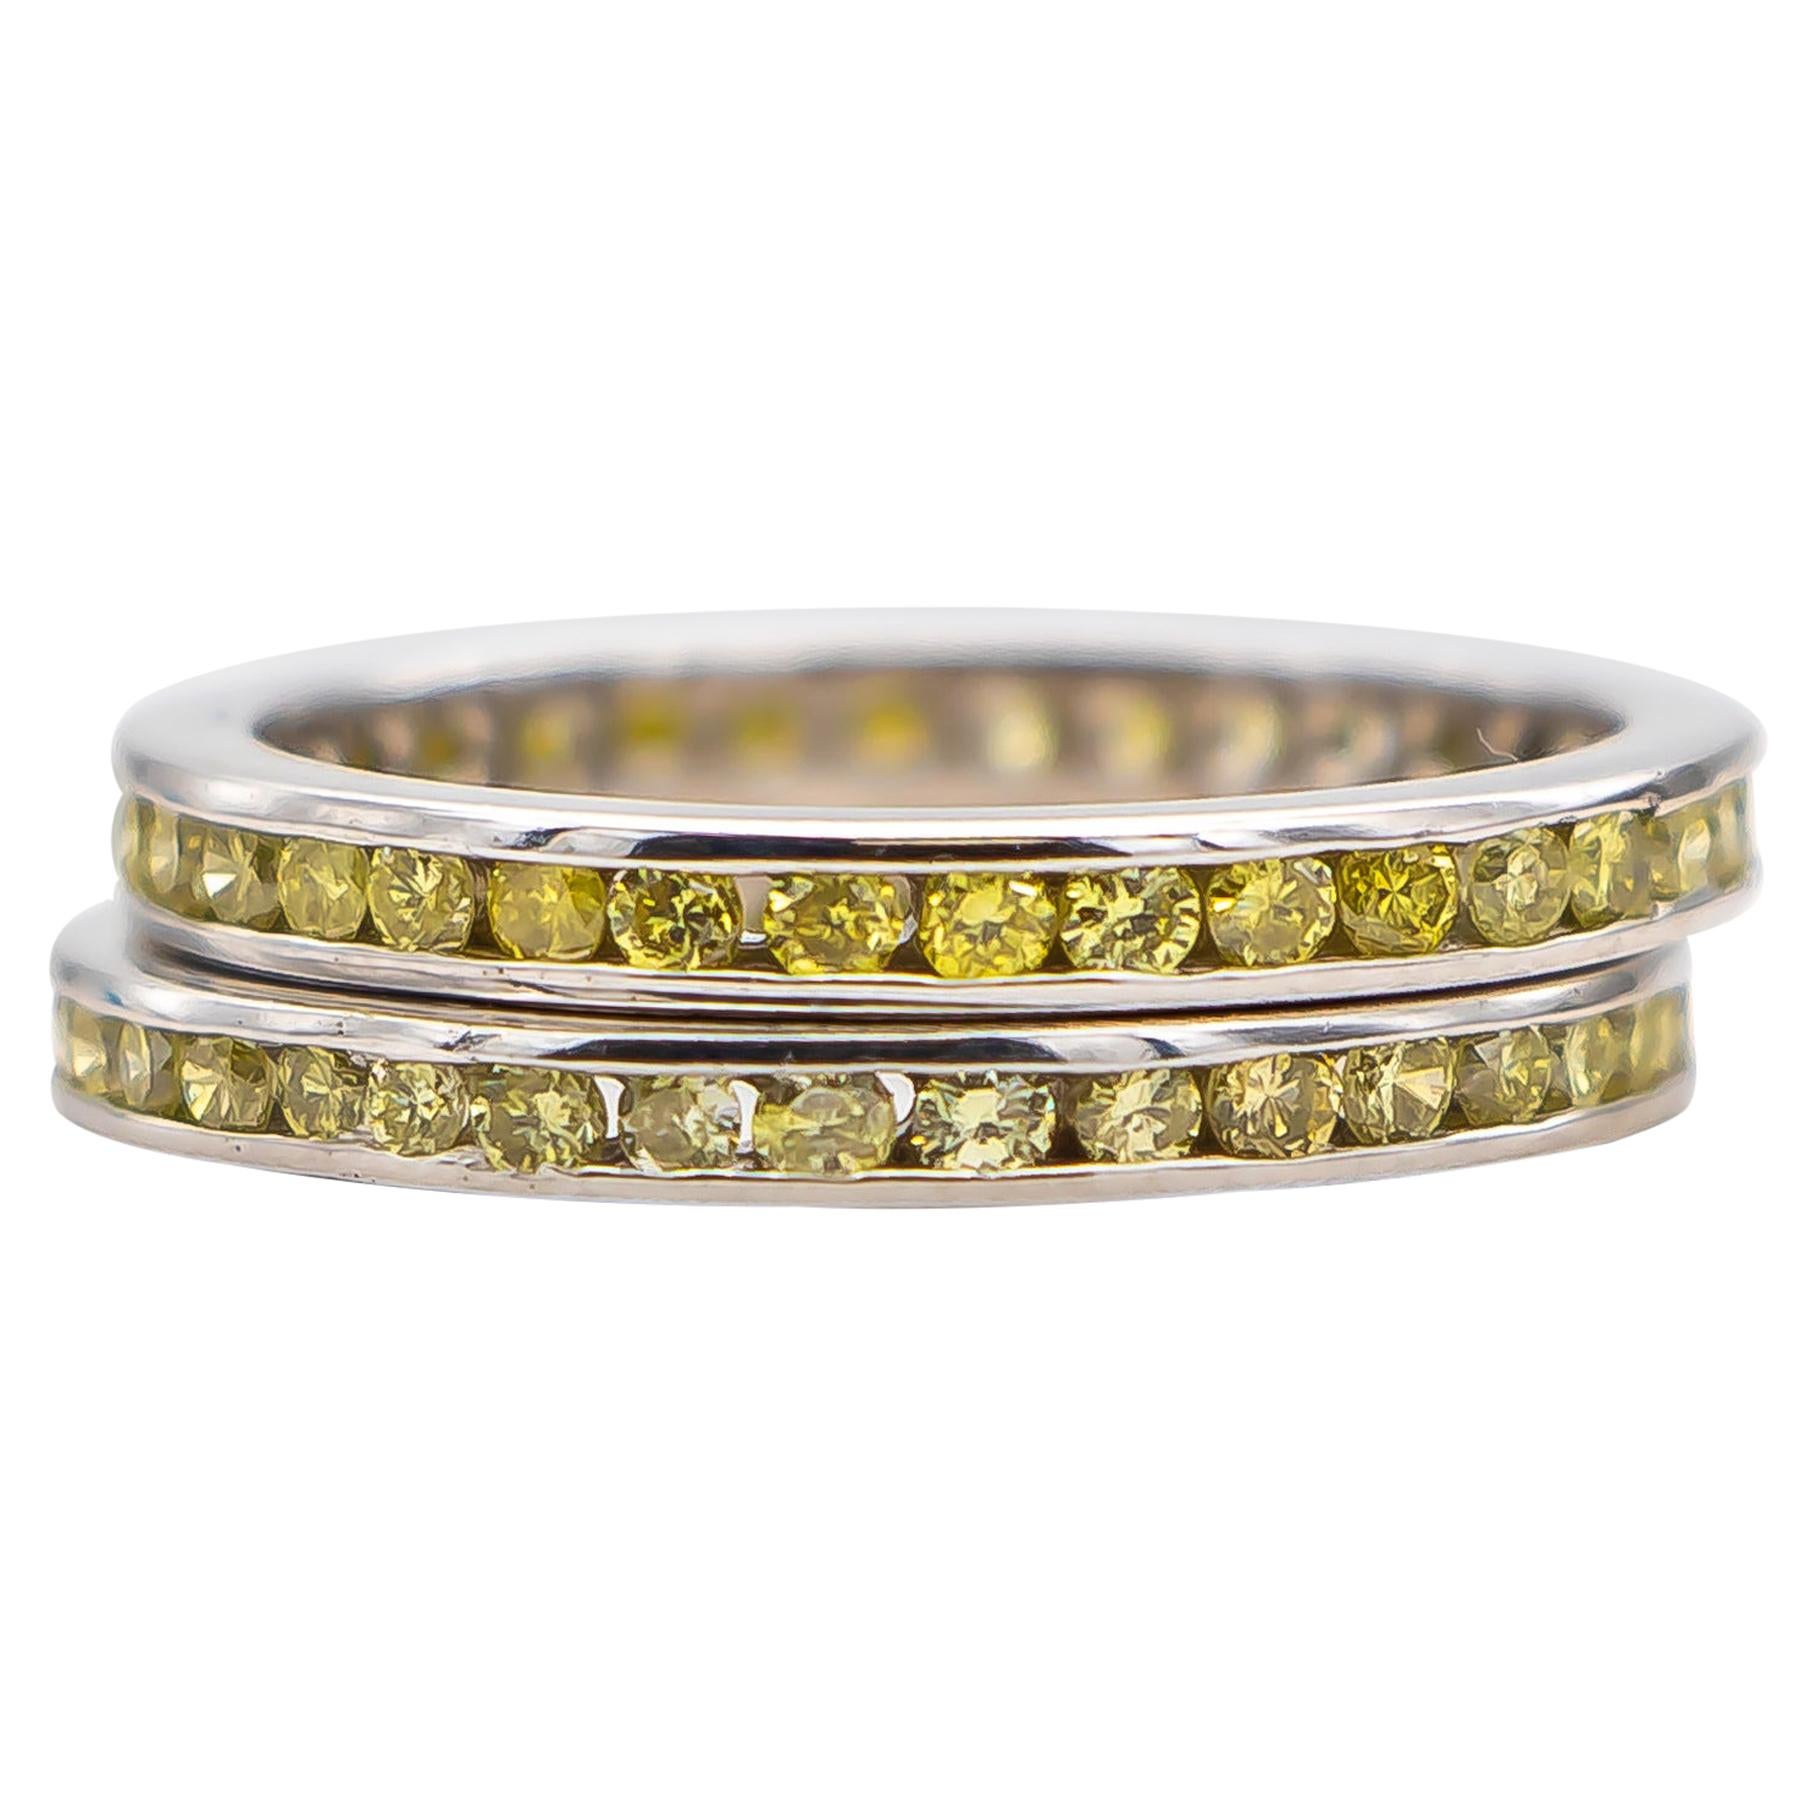 Canary Diamonds Eternity Bands Set of Two 1.20 Carat Total